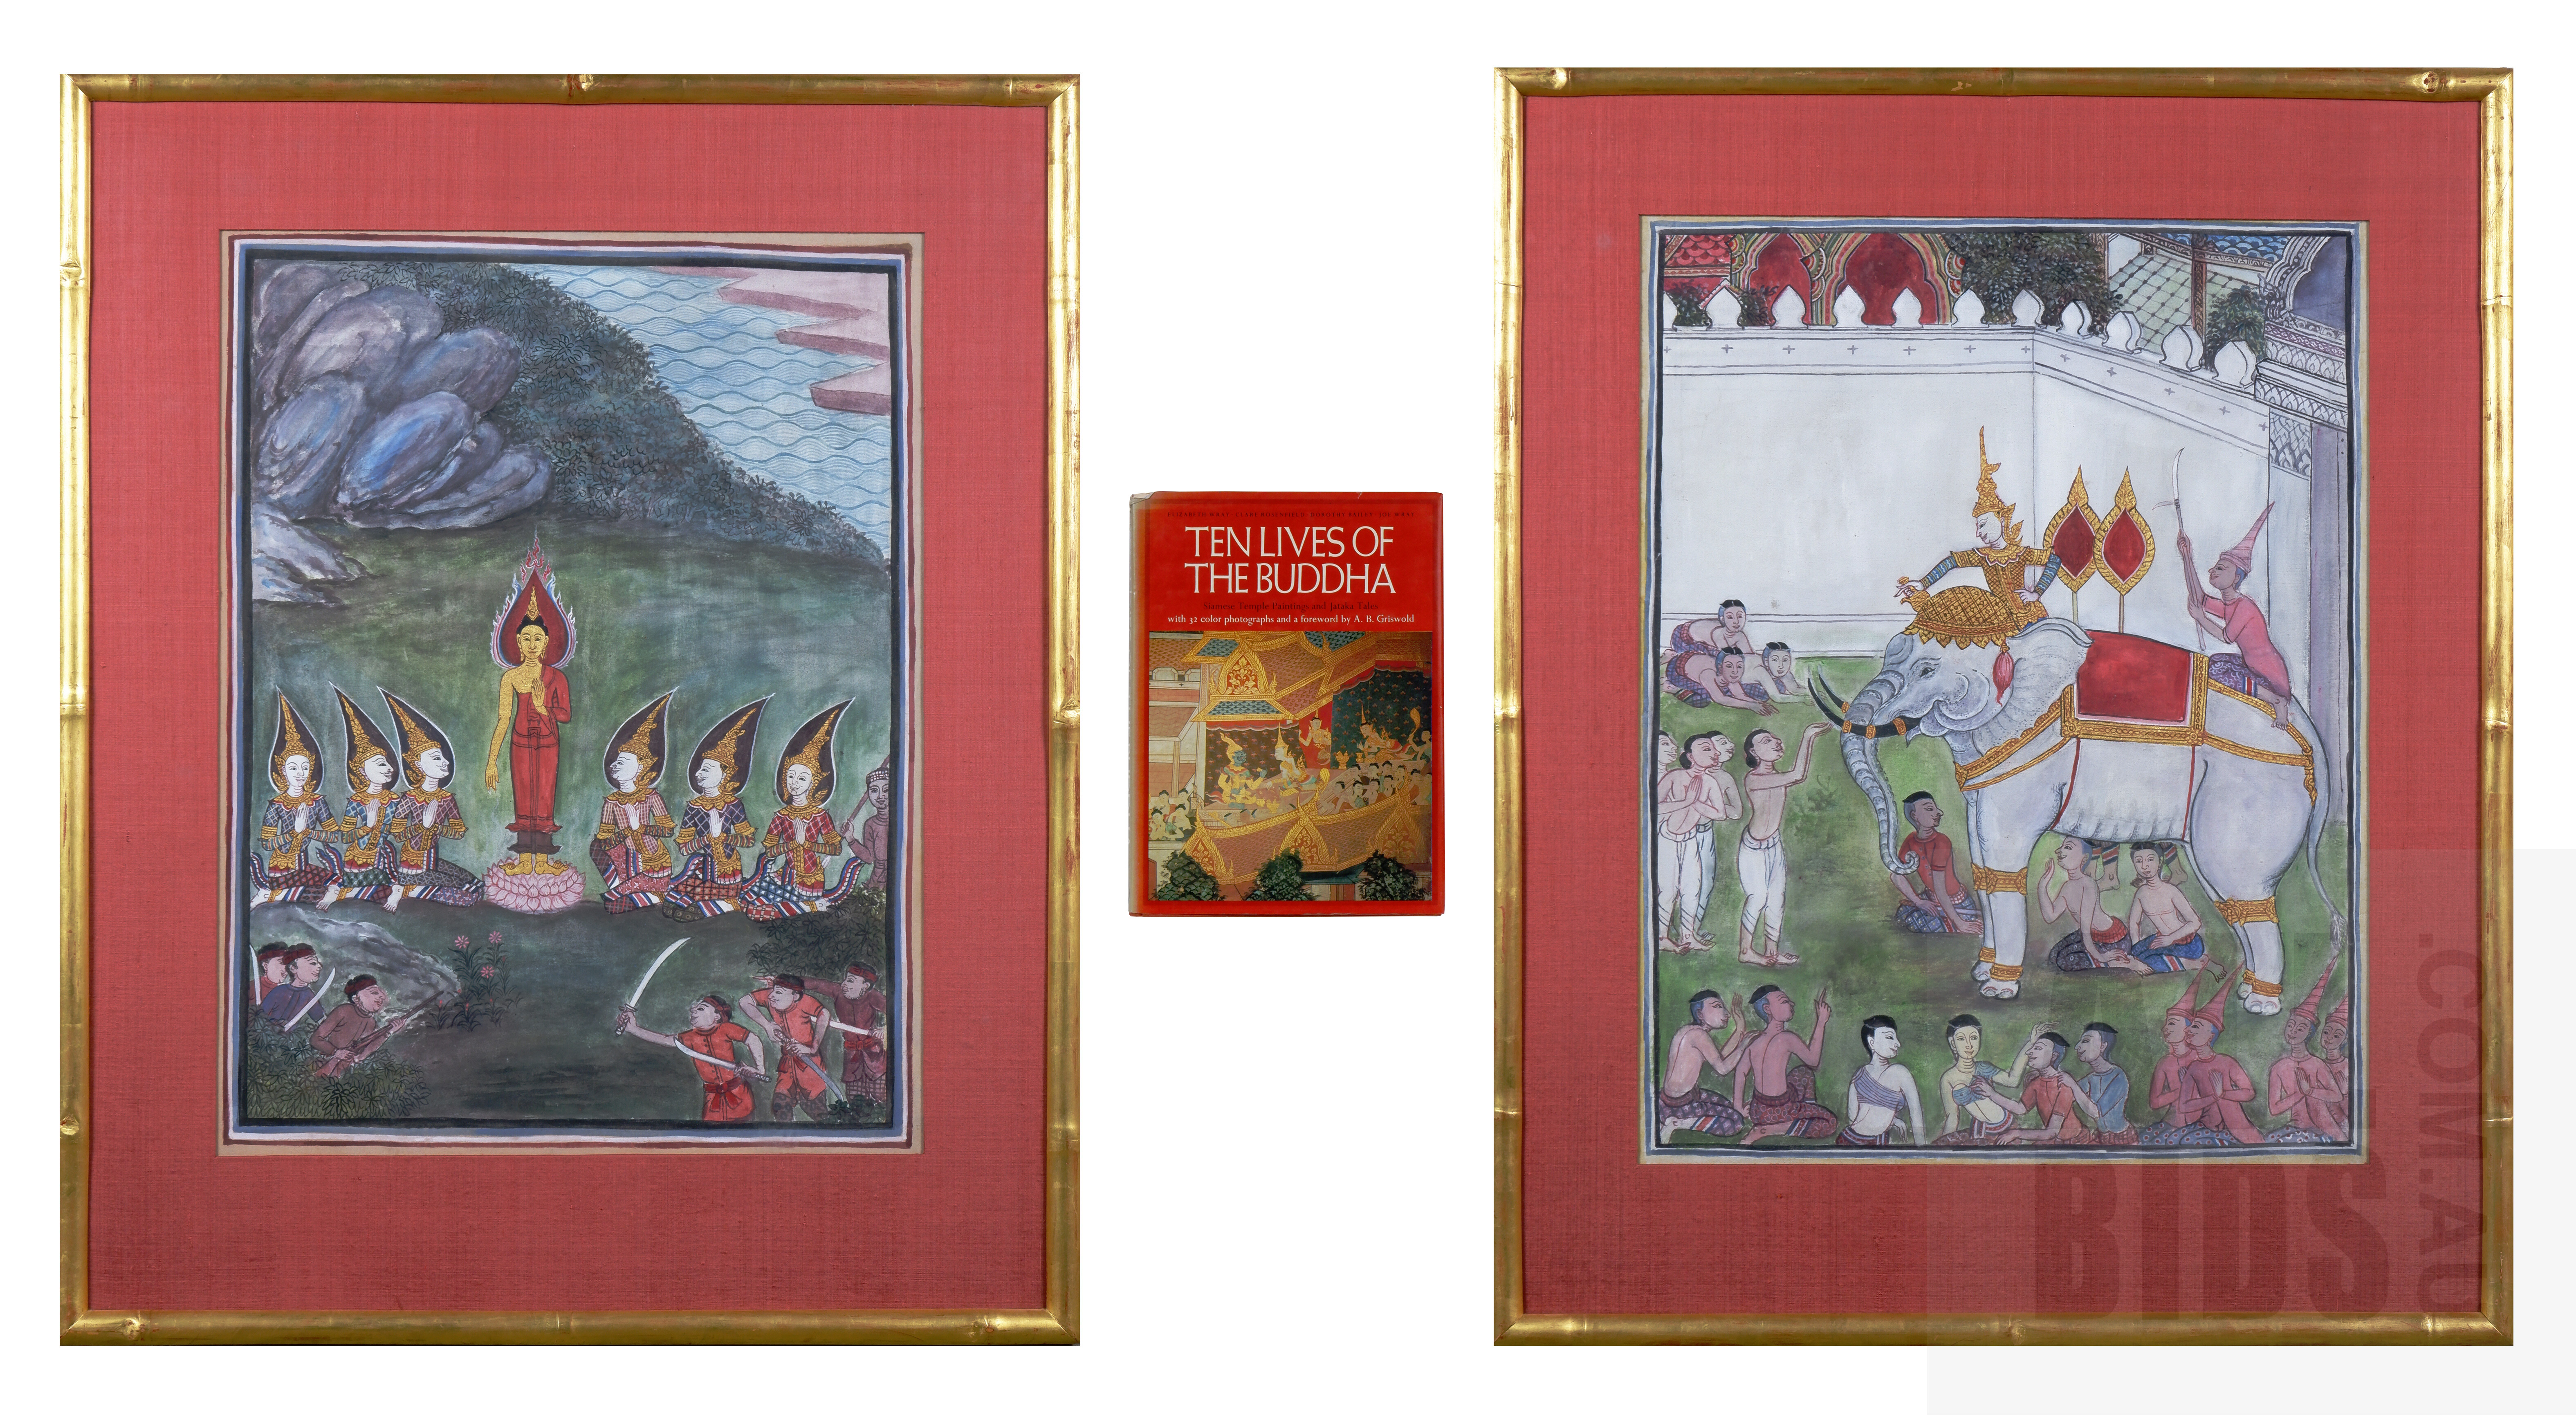 'A Pair of c1950 Hand-Painted Thai Temple Paintings from the Jakata Tales, Presented in Water Gilded Natural Bamboo Frames with Jim Thompson Silk Lining, each 56 x 43 cm, Accompanied by the Book, The Ten Lives of Buddha (3 items)'